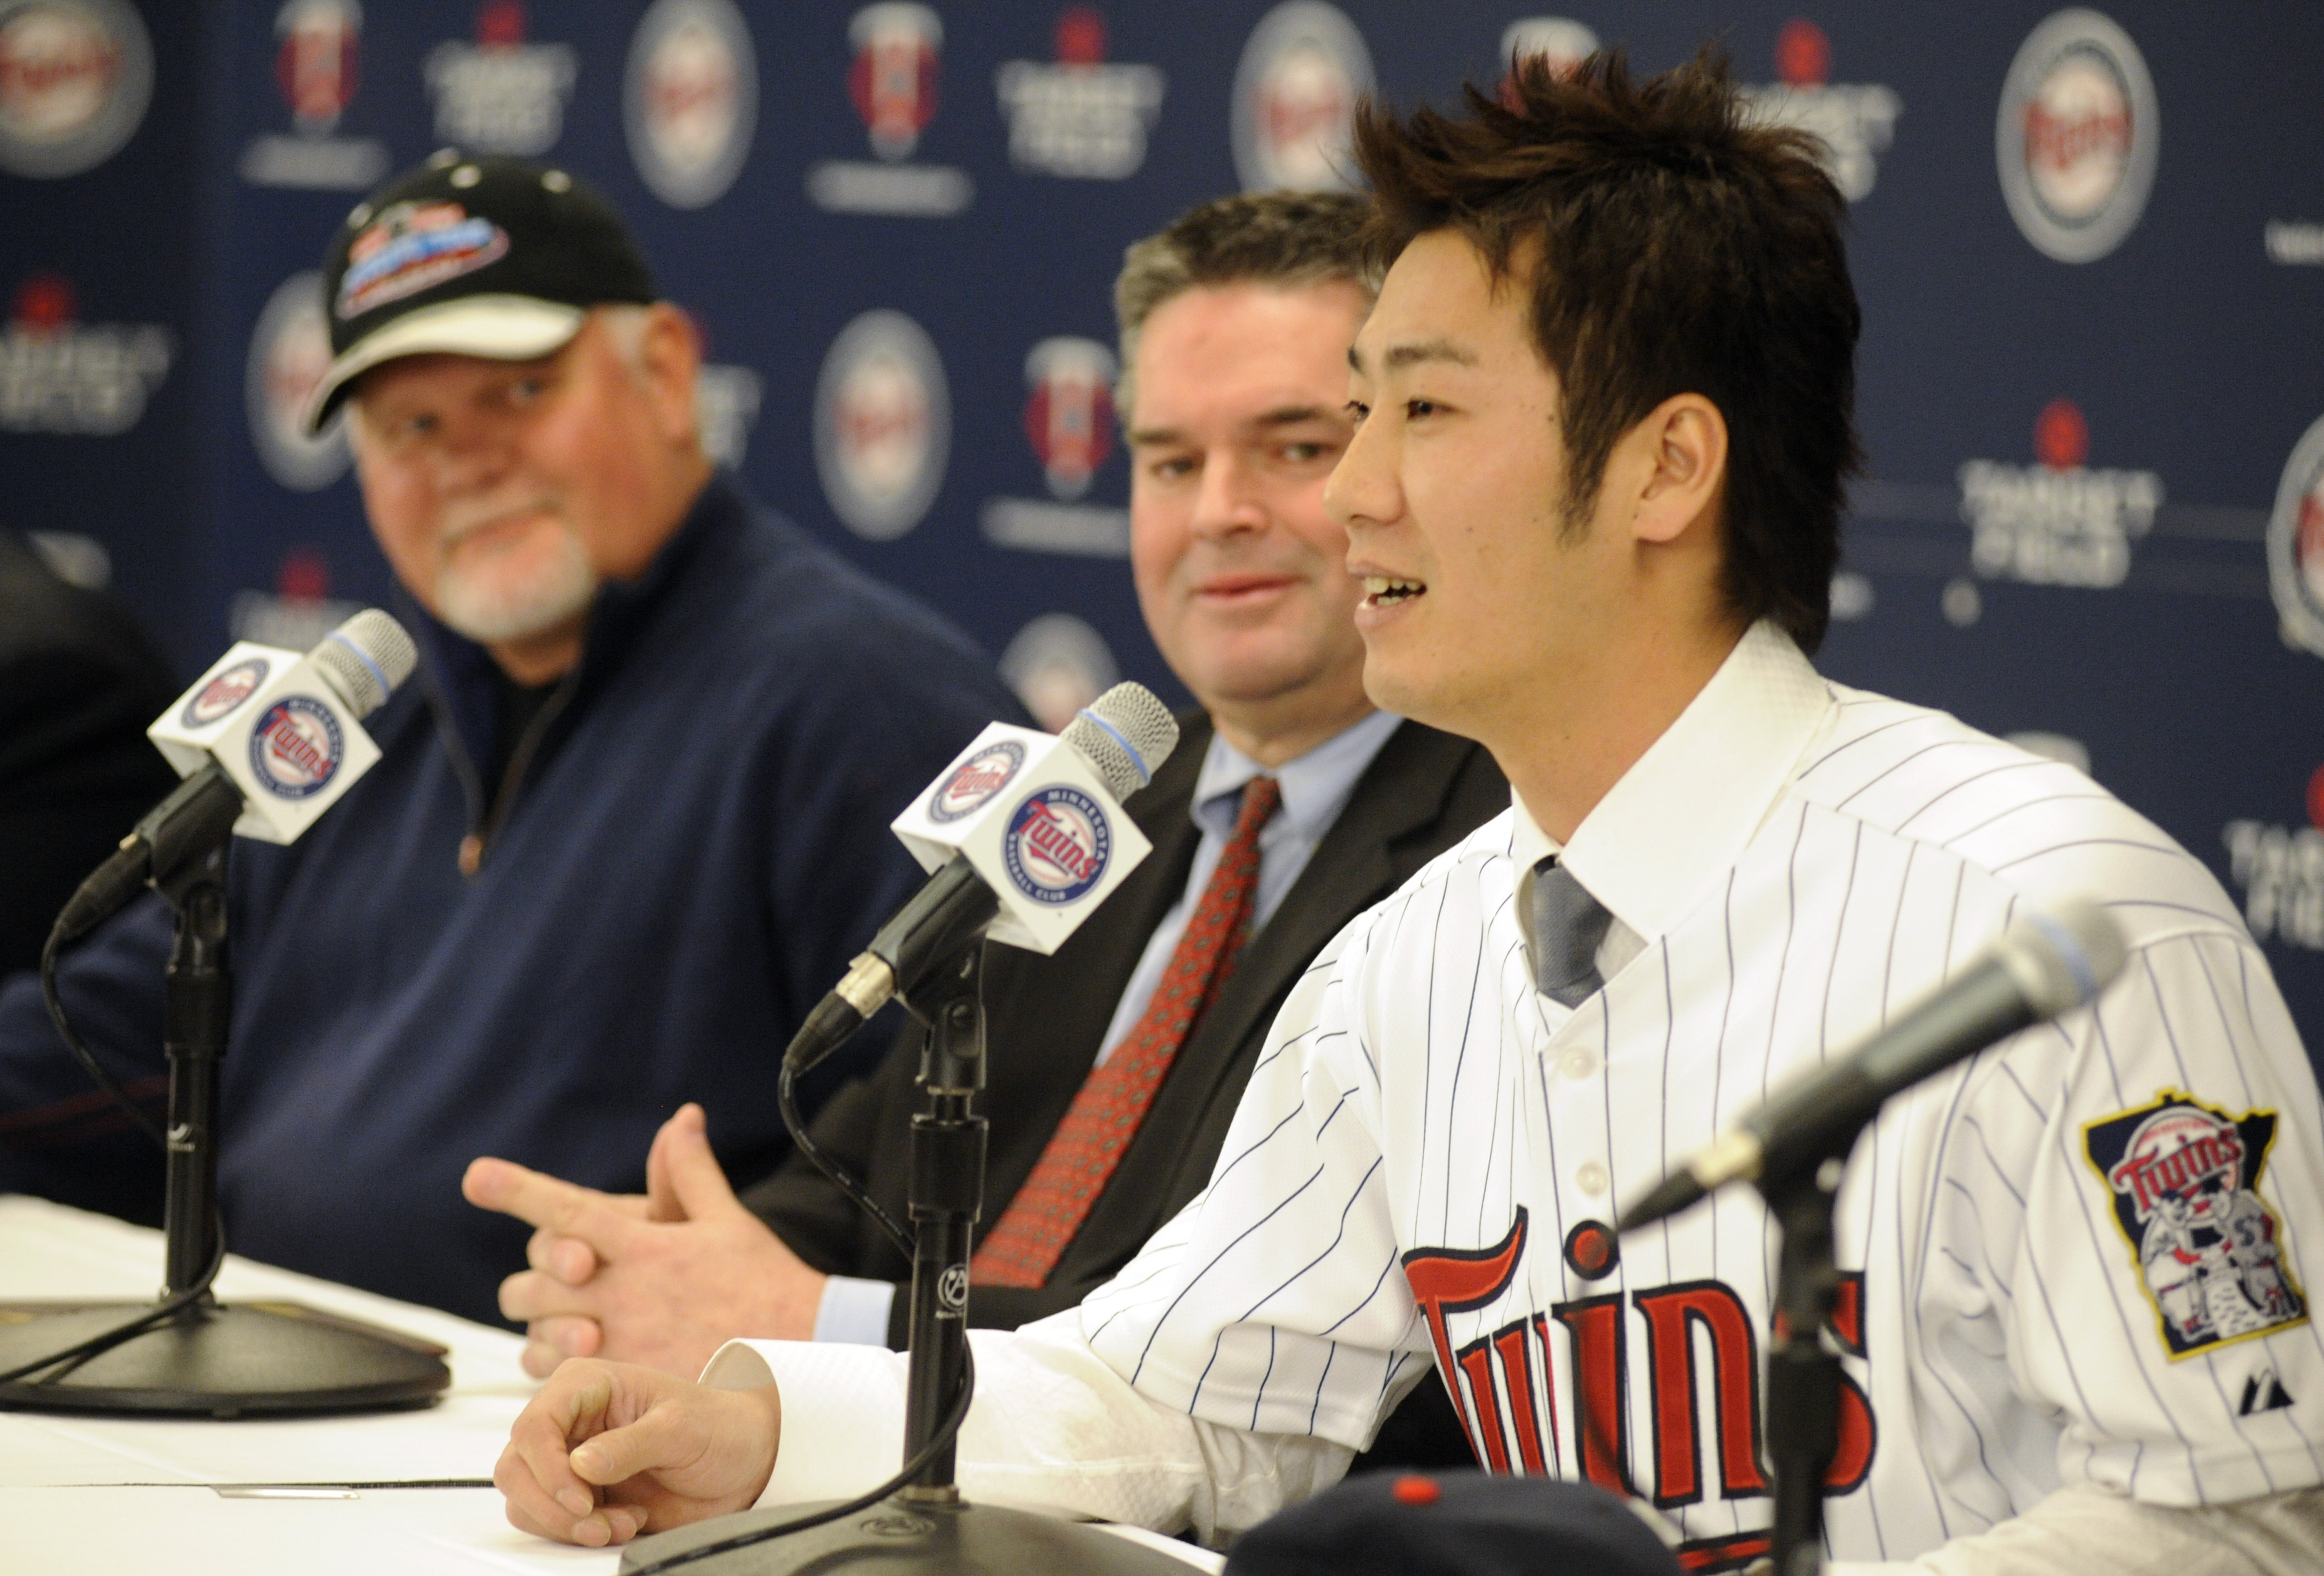 Manager Ron Gardenhire stares longingly at his new middle-infielder Tsuyoshi Nishioka at the press conference last week.